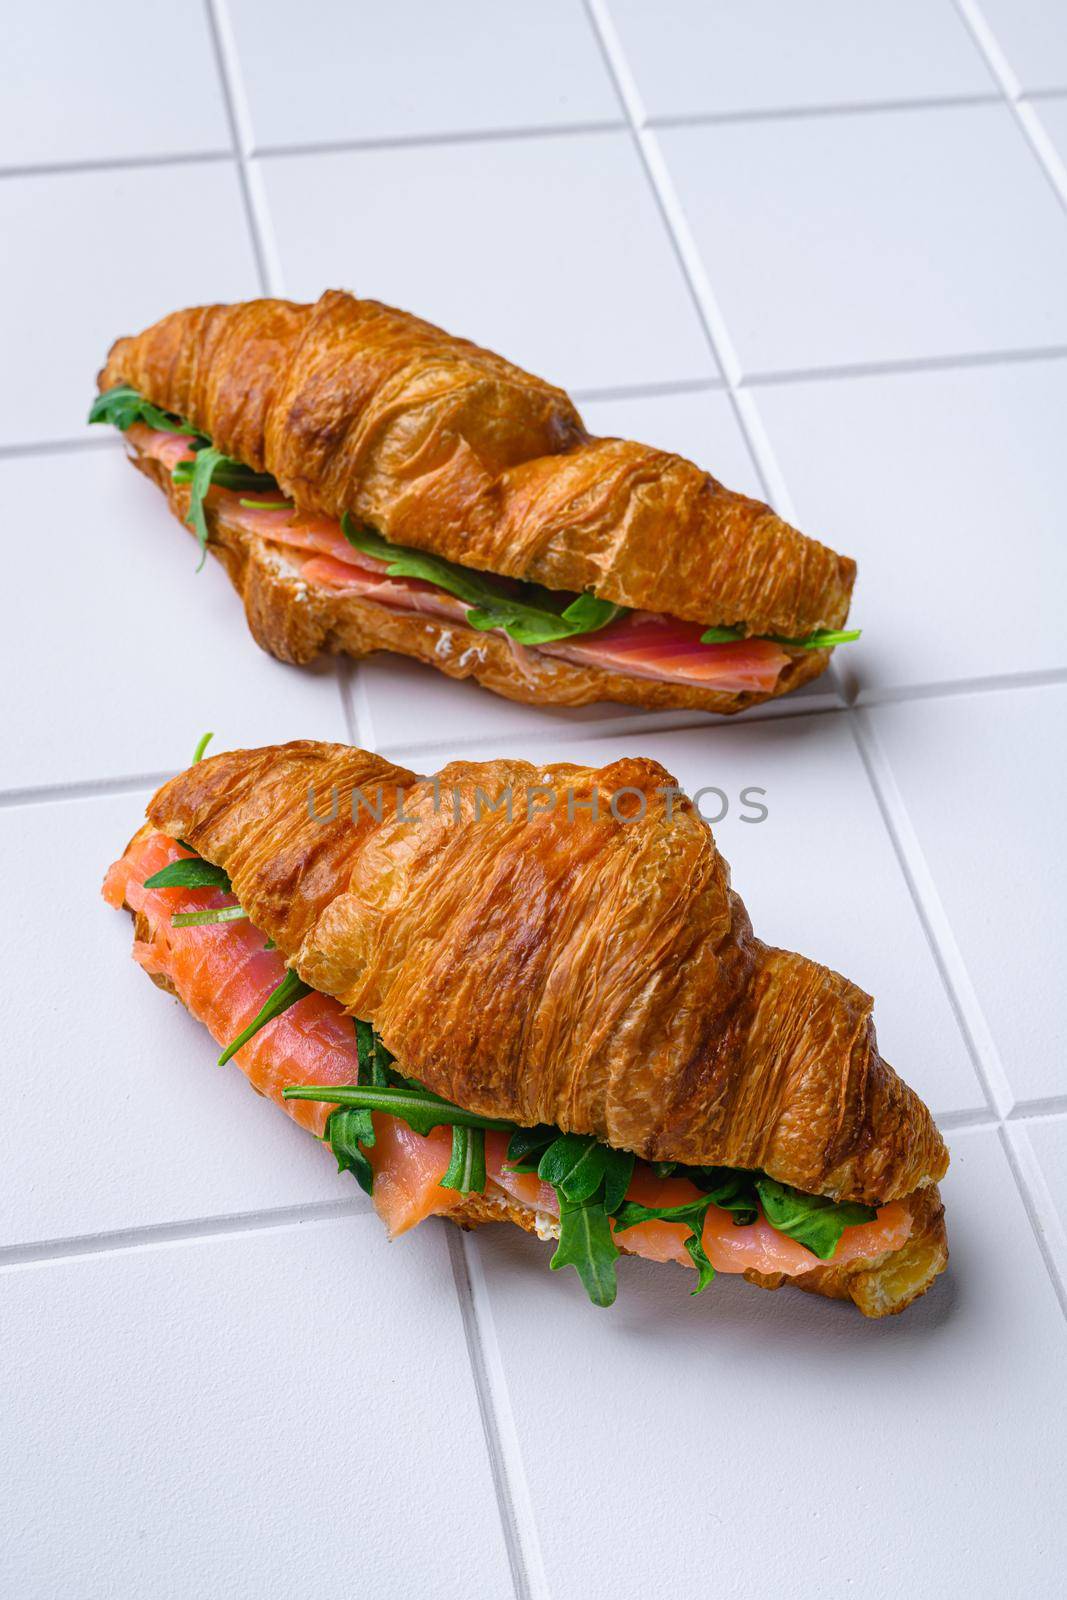 Croissant with salmon and cream cheese set, on white ceramic squared tile table background